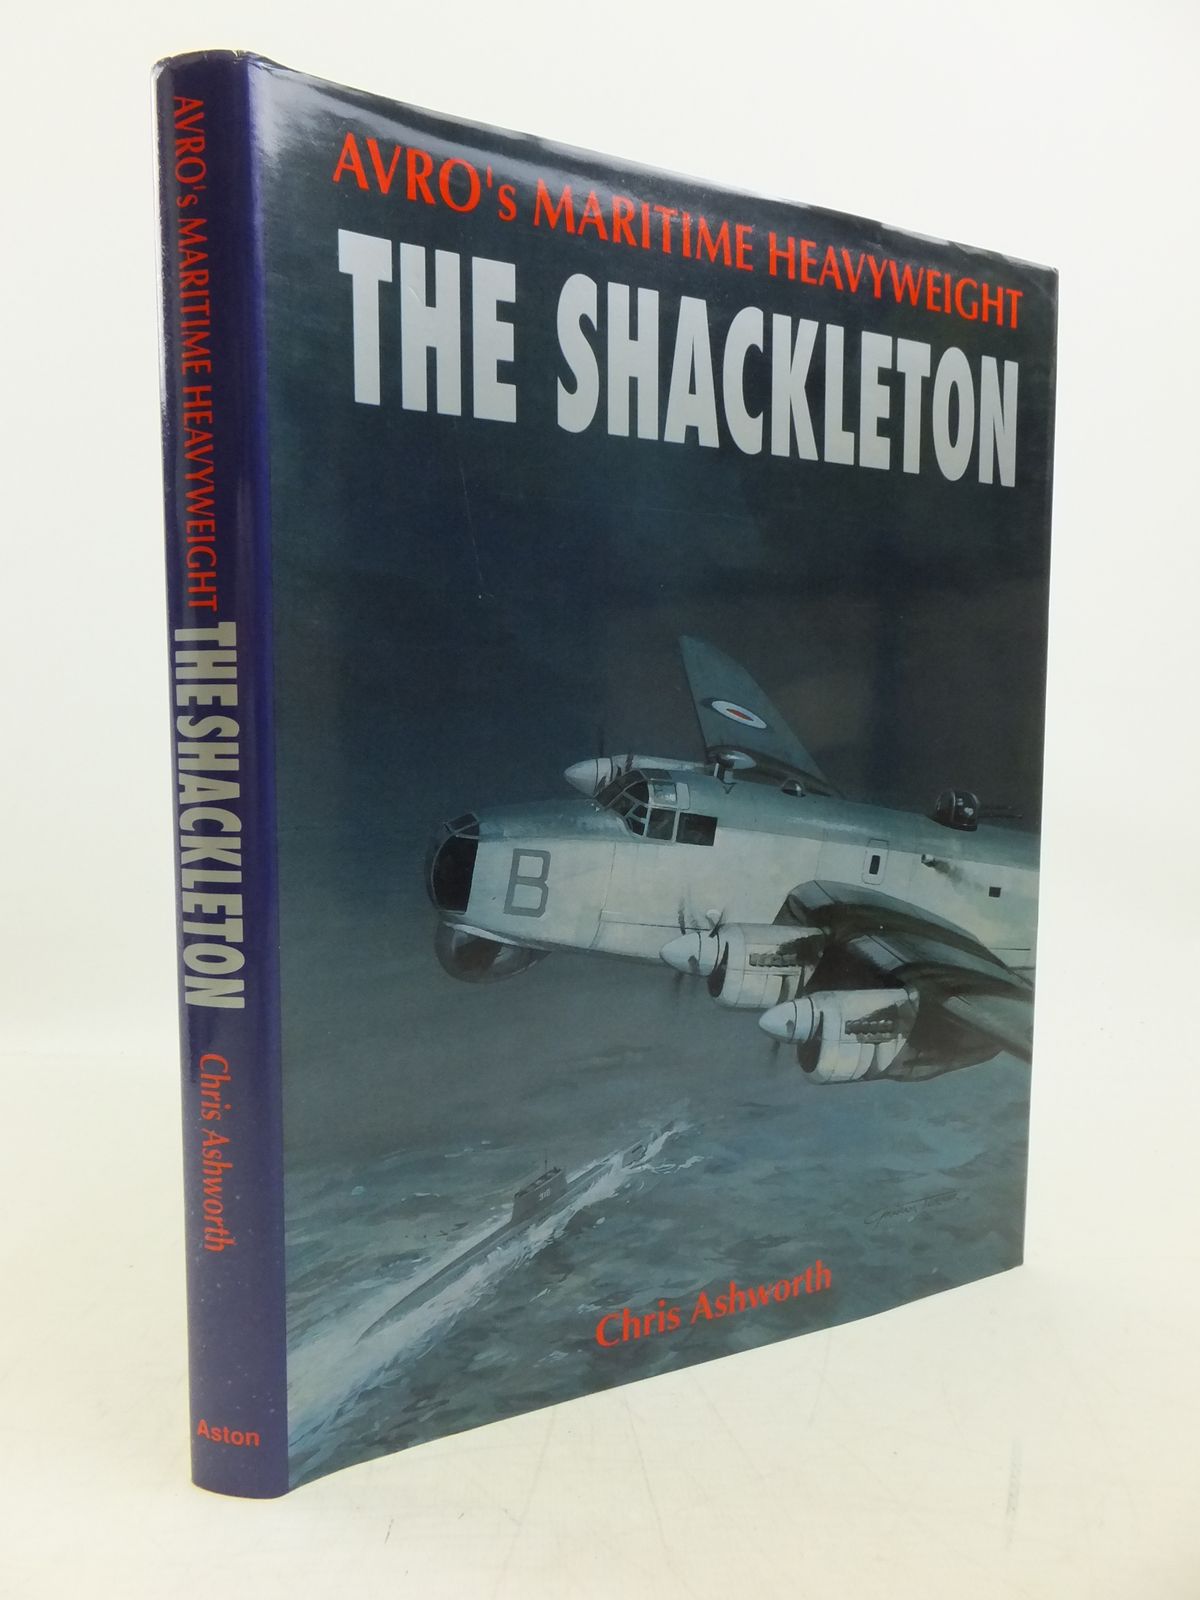 Photo of AVRO'S MARITIME HEAVYWEIGHT: THE SHACKLETON written by Ashworth, Chris published by Aston Publications (STOCK CODE: 2120234)  for sale by Stella & Rose's Books